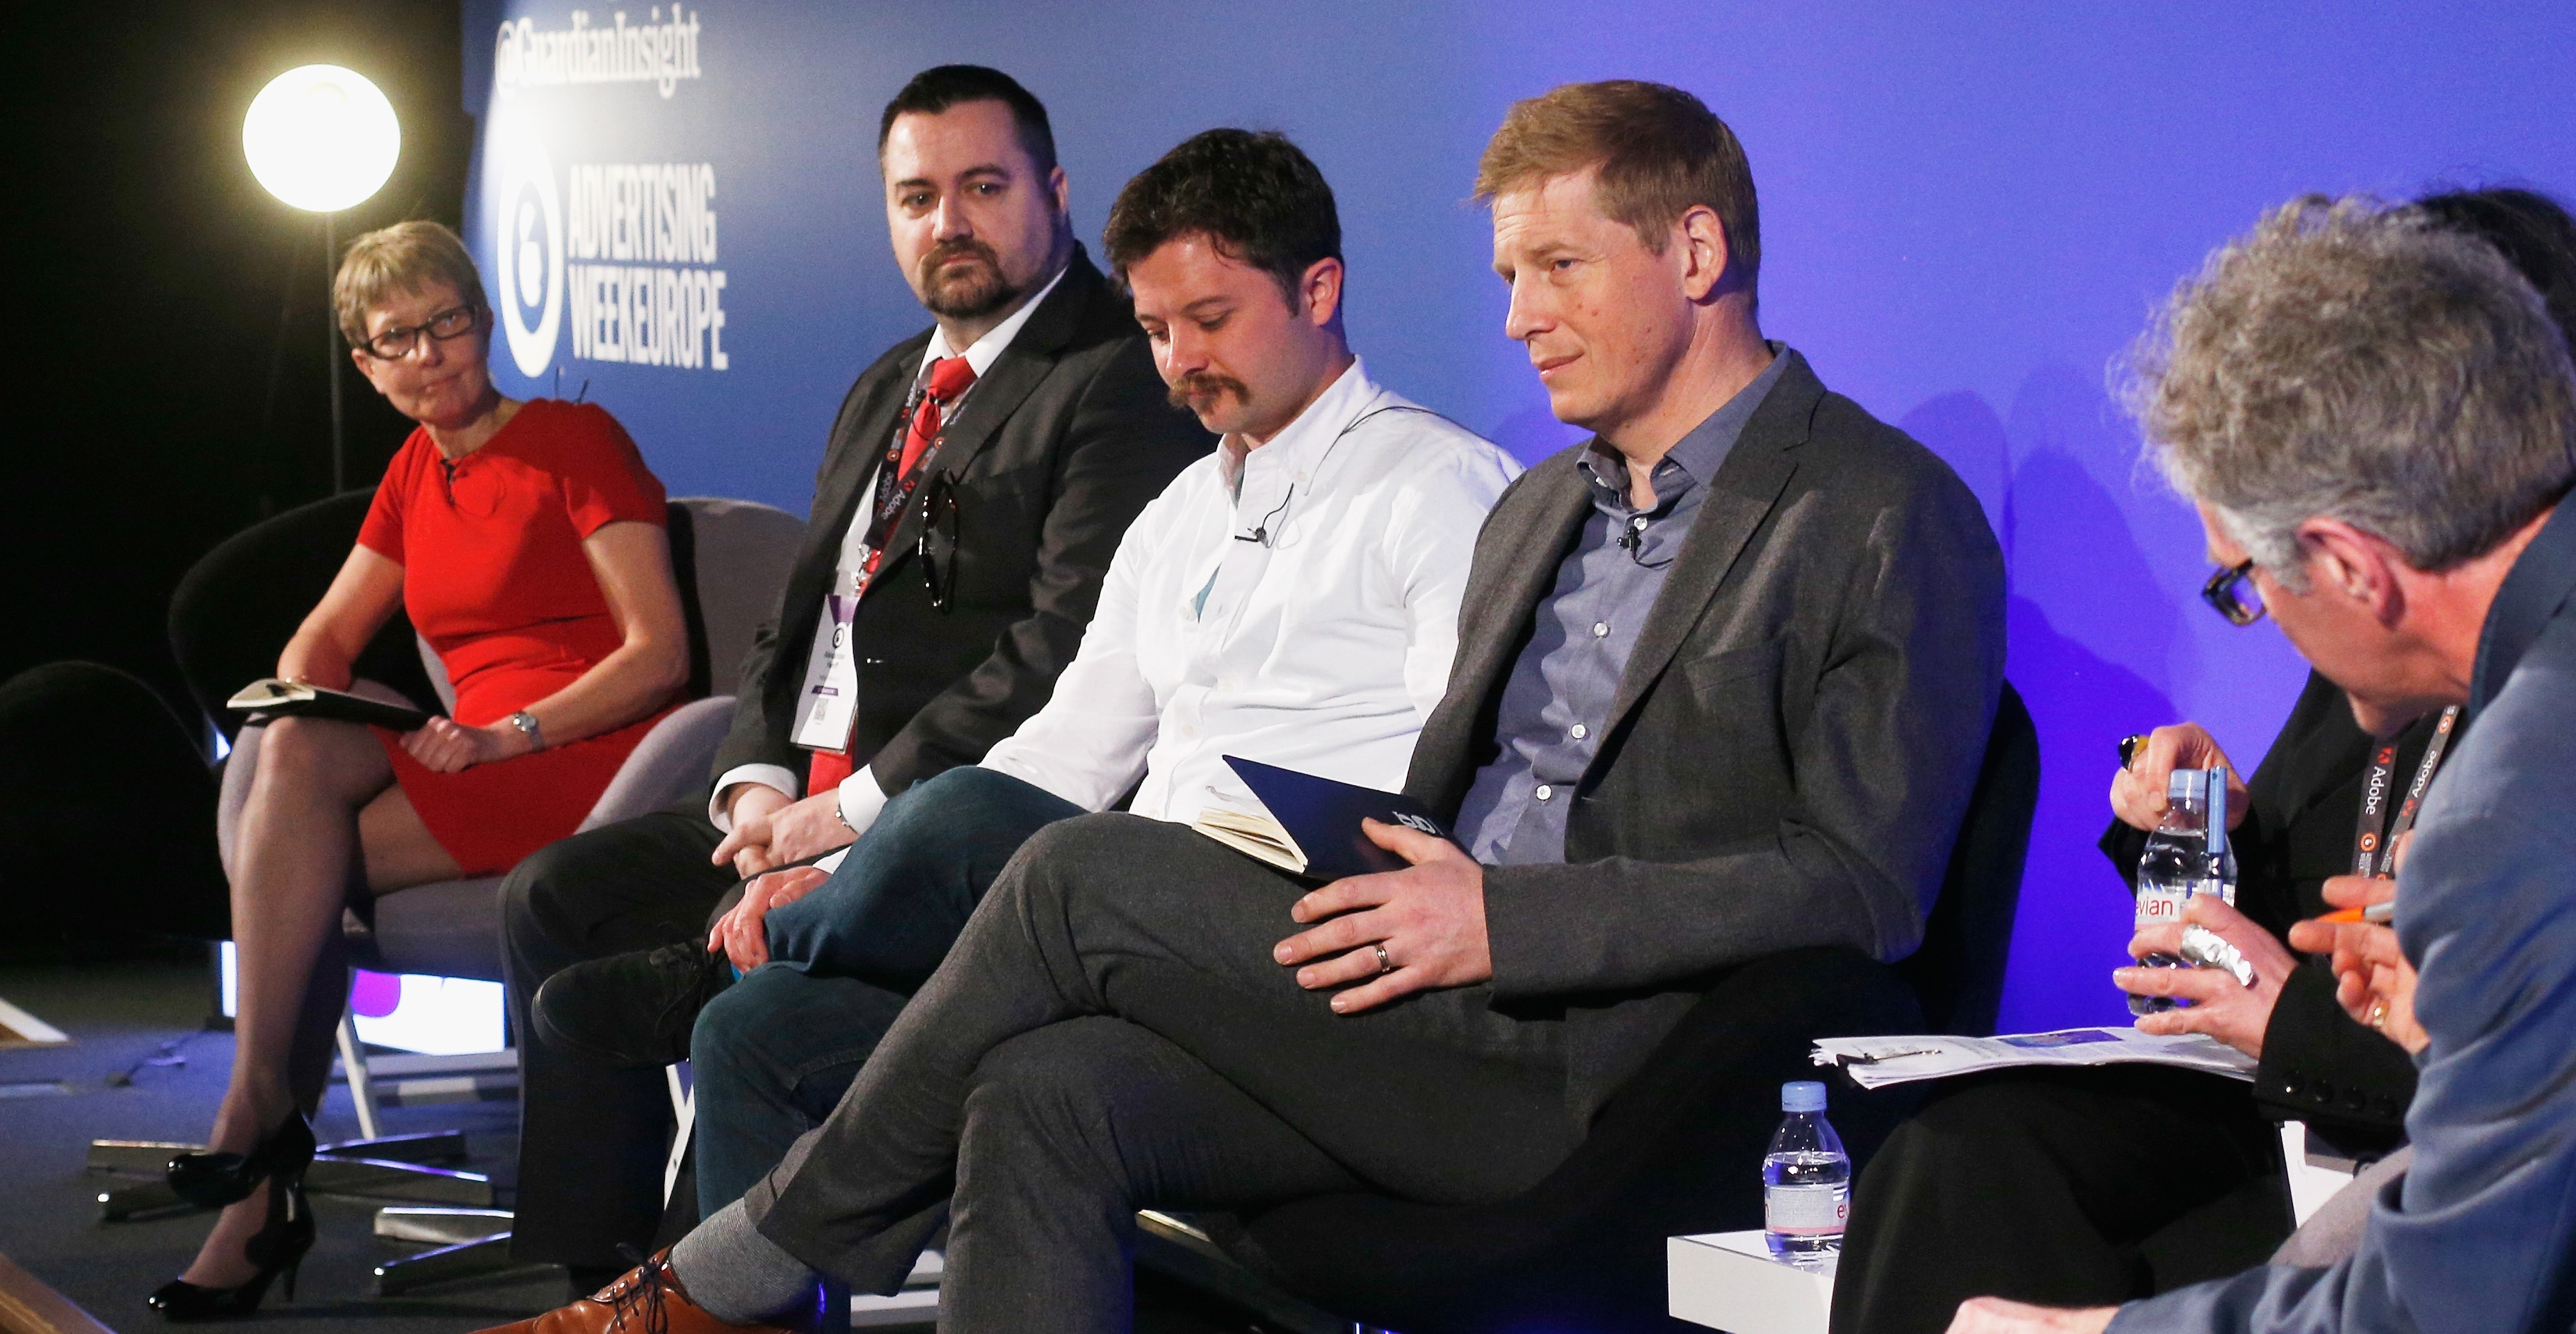  Tim Gentry, Ben Williams and Alexander Hanff on the 'Ad Blocking: A New Deal or a Modern Day Protection Racket?' panel at Ad Week Europe